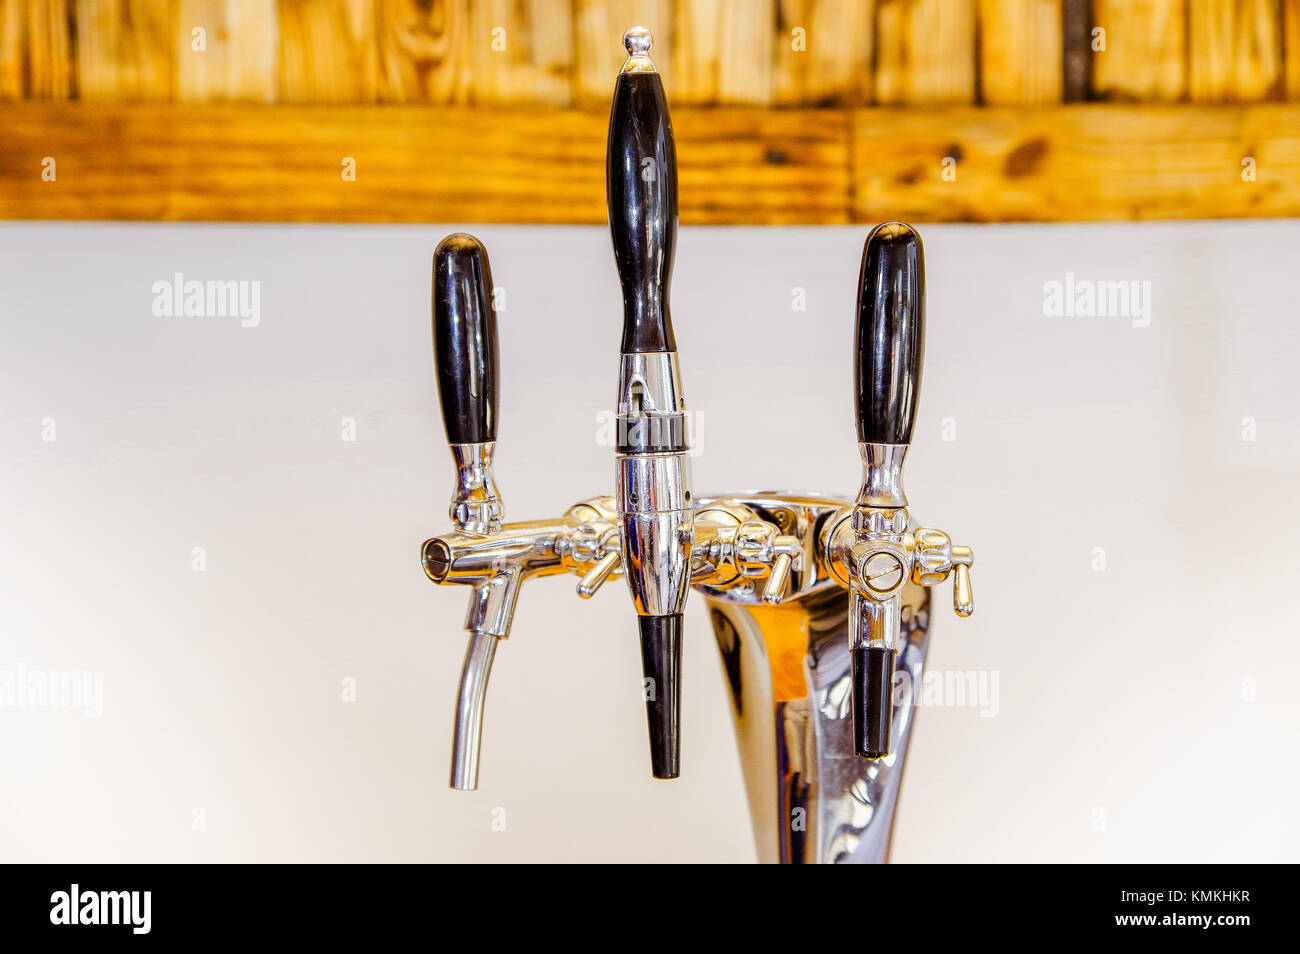 Close up of multiple beer taps located over a wooden table in a blurred background Stock Photo